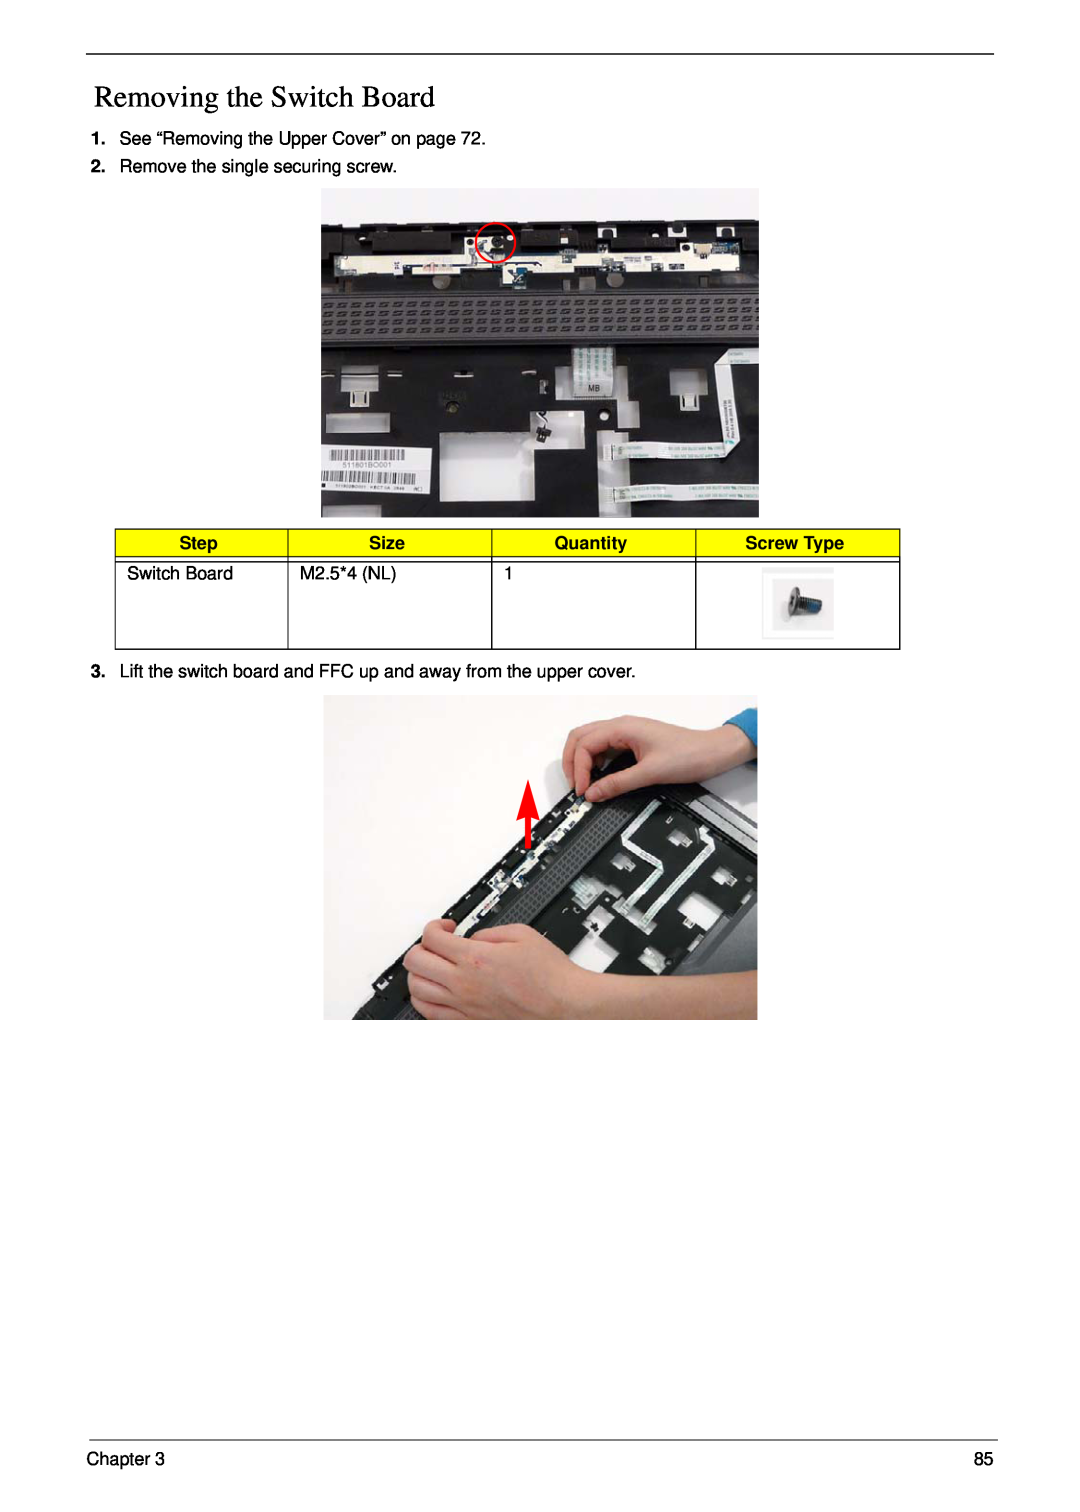 Acer 5530G manual Removing the Switch Board, Step, Size, Quantity, Screw Type, M2.5*4 NL 